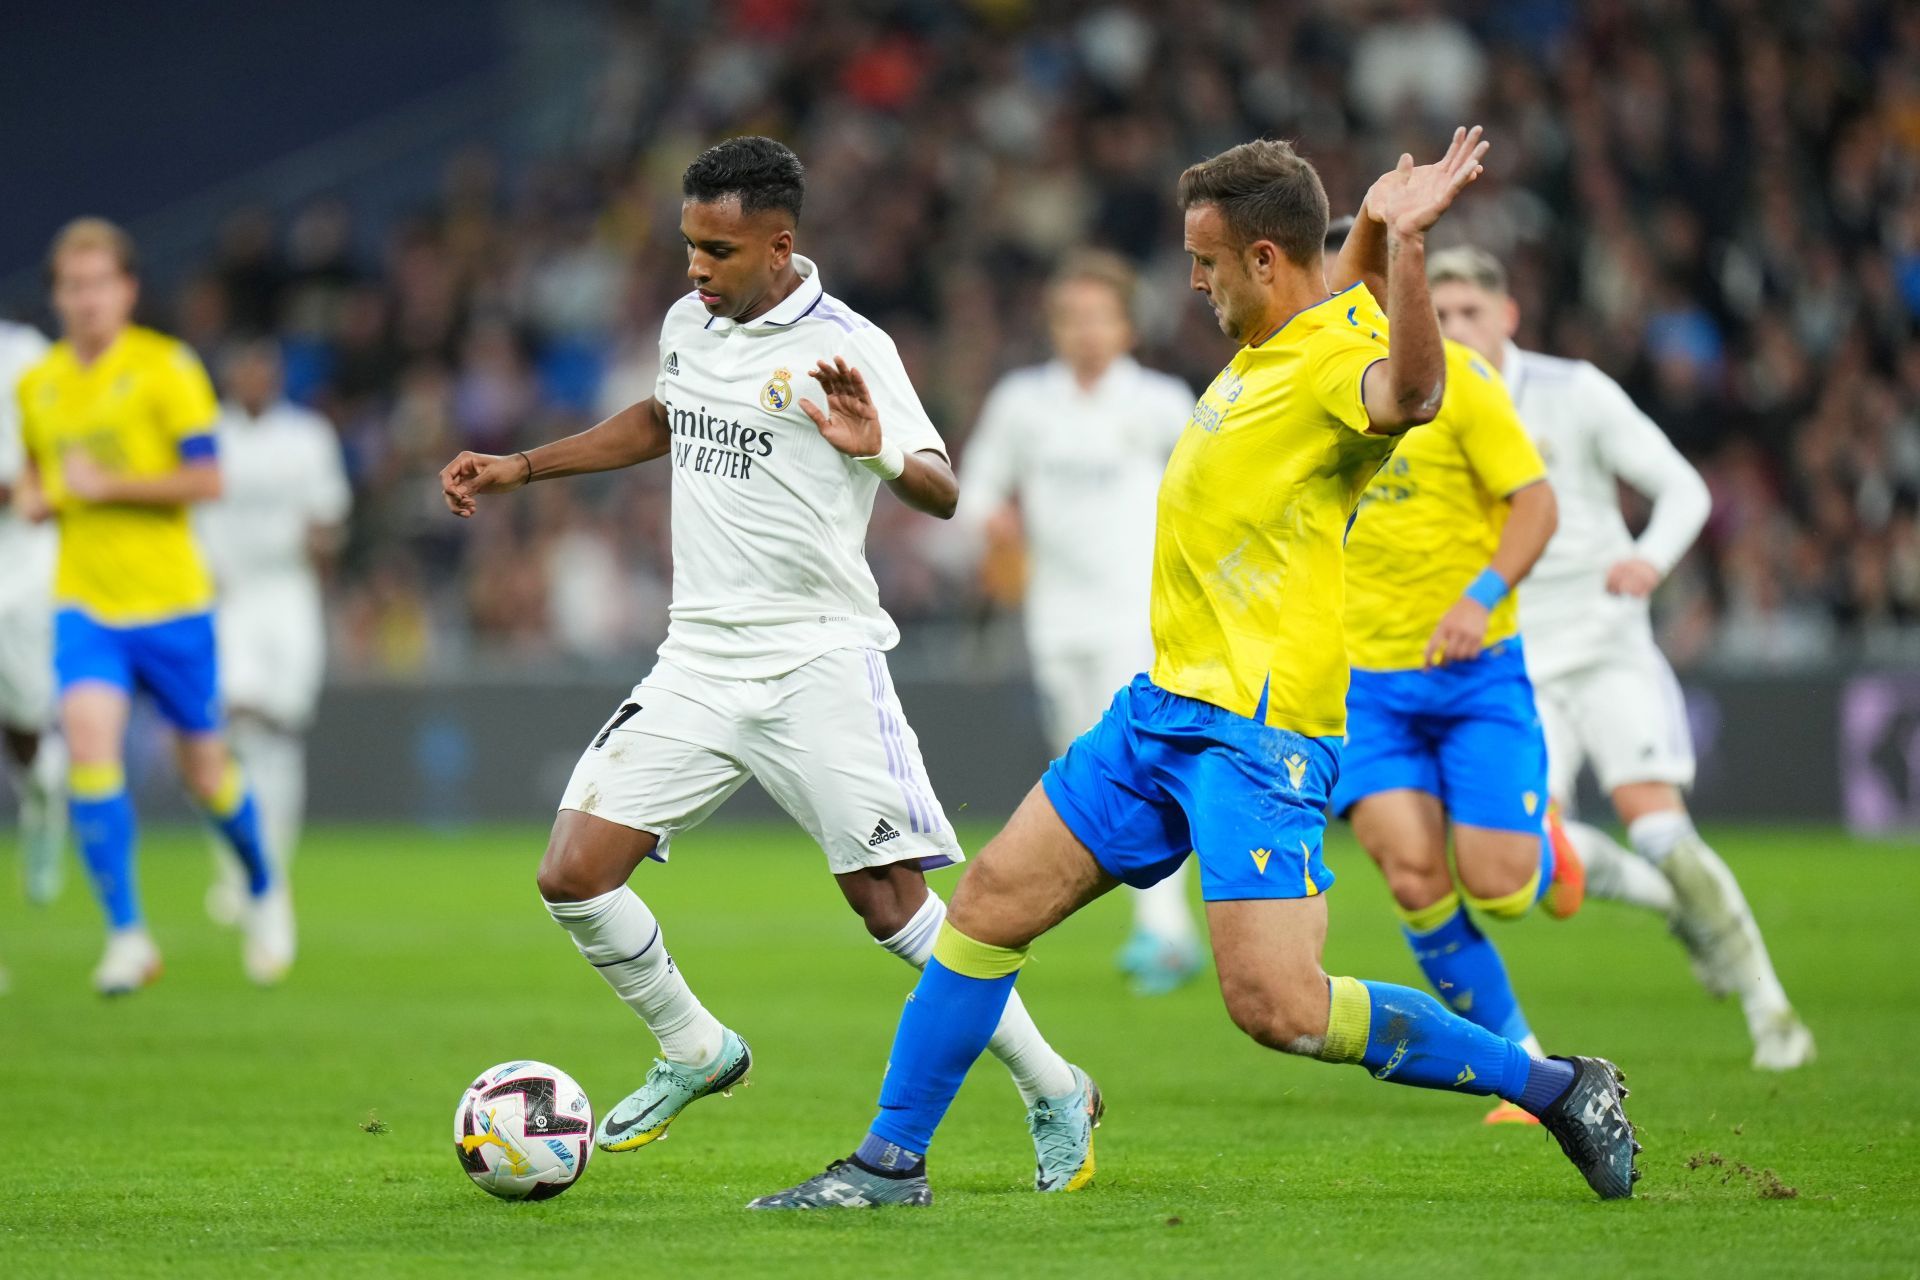 Rodrygo playing for Real Madrid